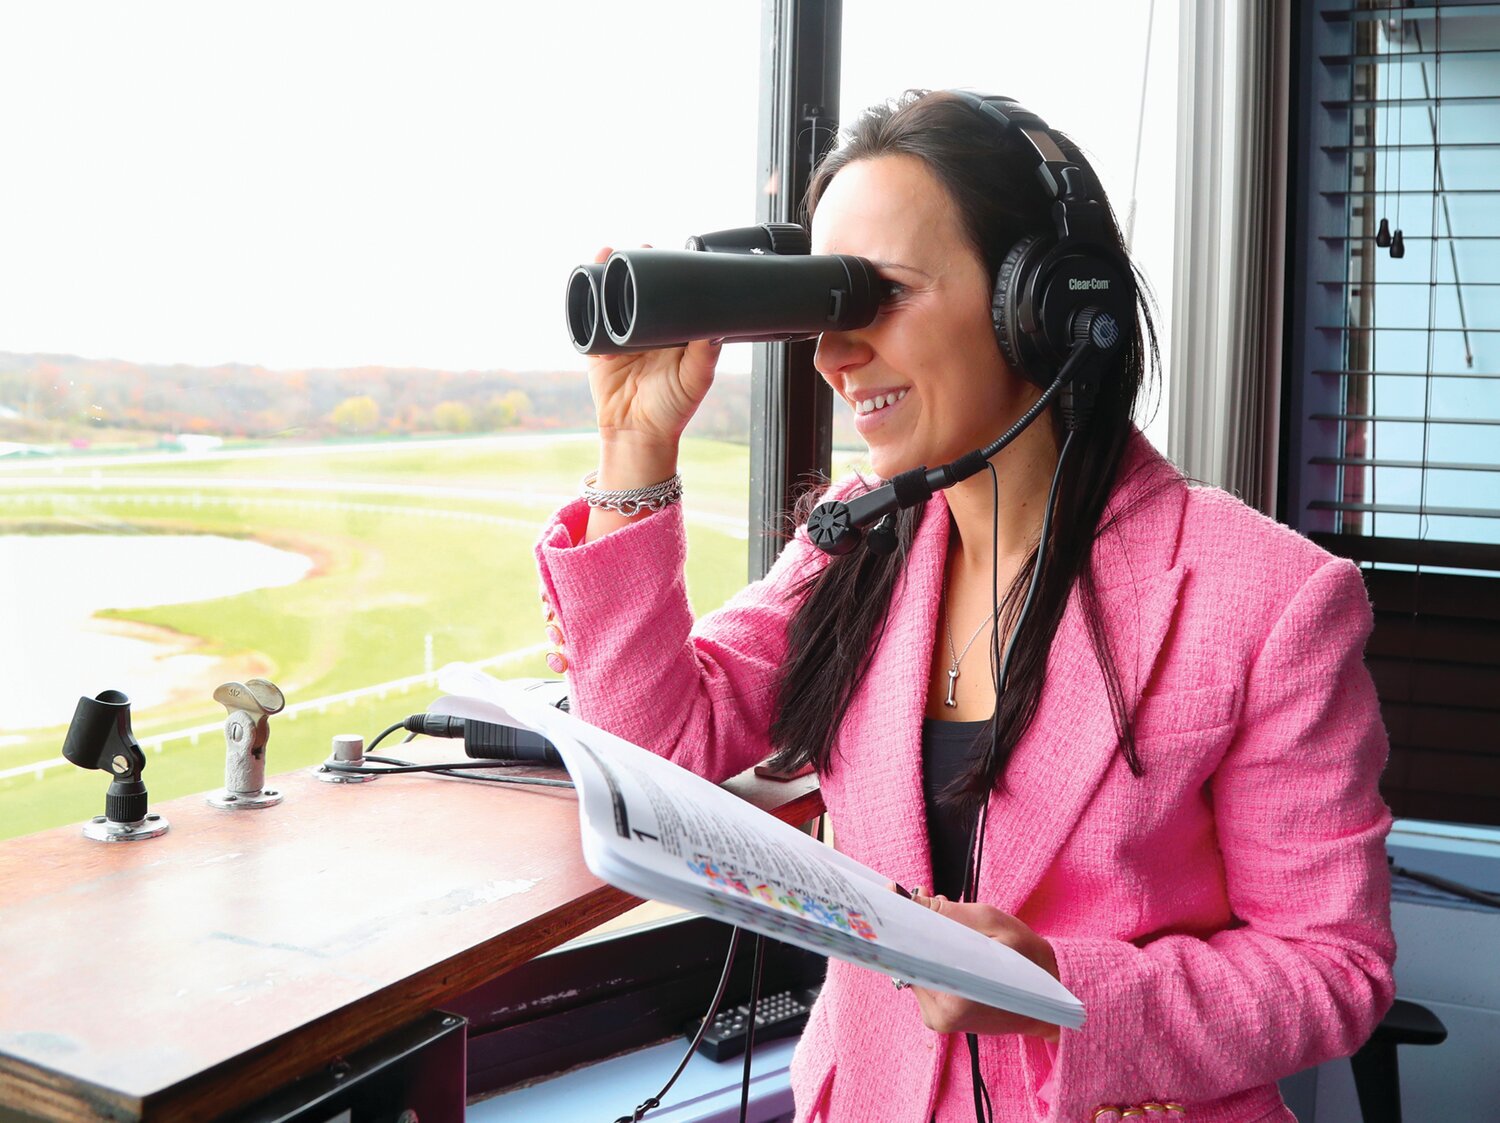 Jessica Paquette prepares for her first day as track announcer at Parx Racing in Bensalem on Nov. 15, 2022. On Saturday, Paquette became the first woman to call a Grade 1 stakes in North America.